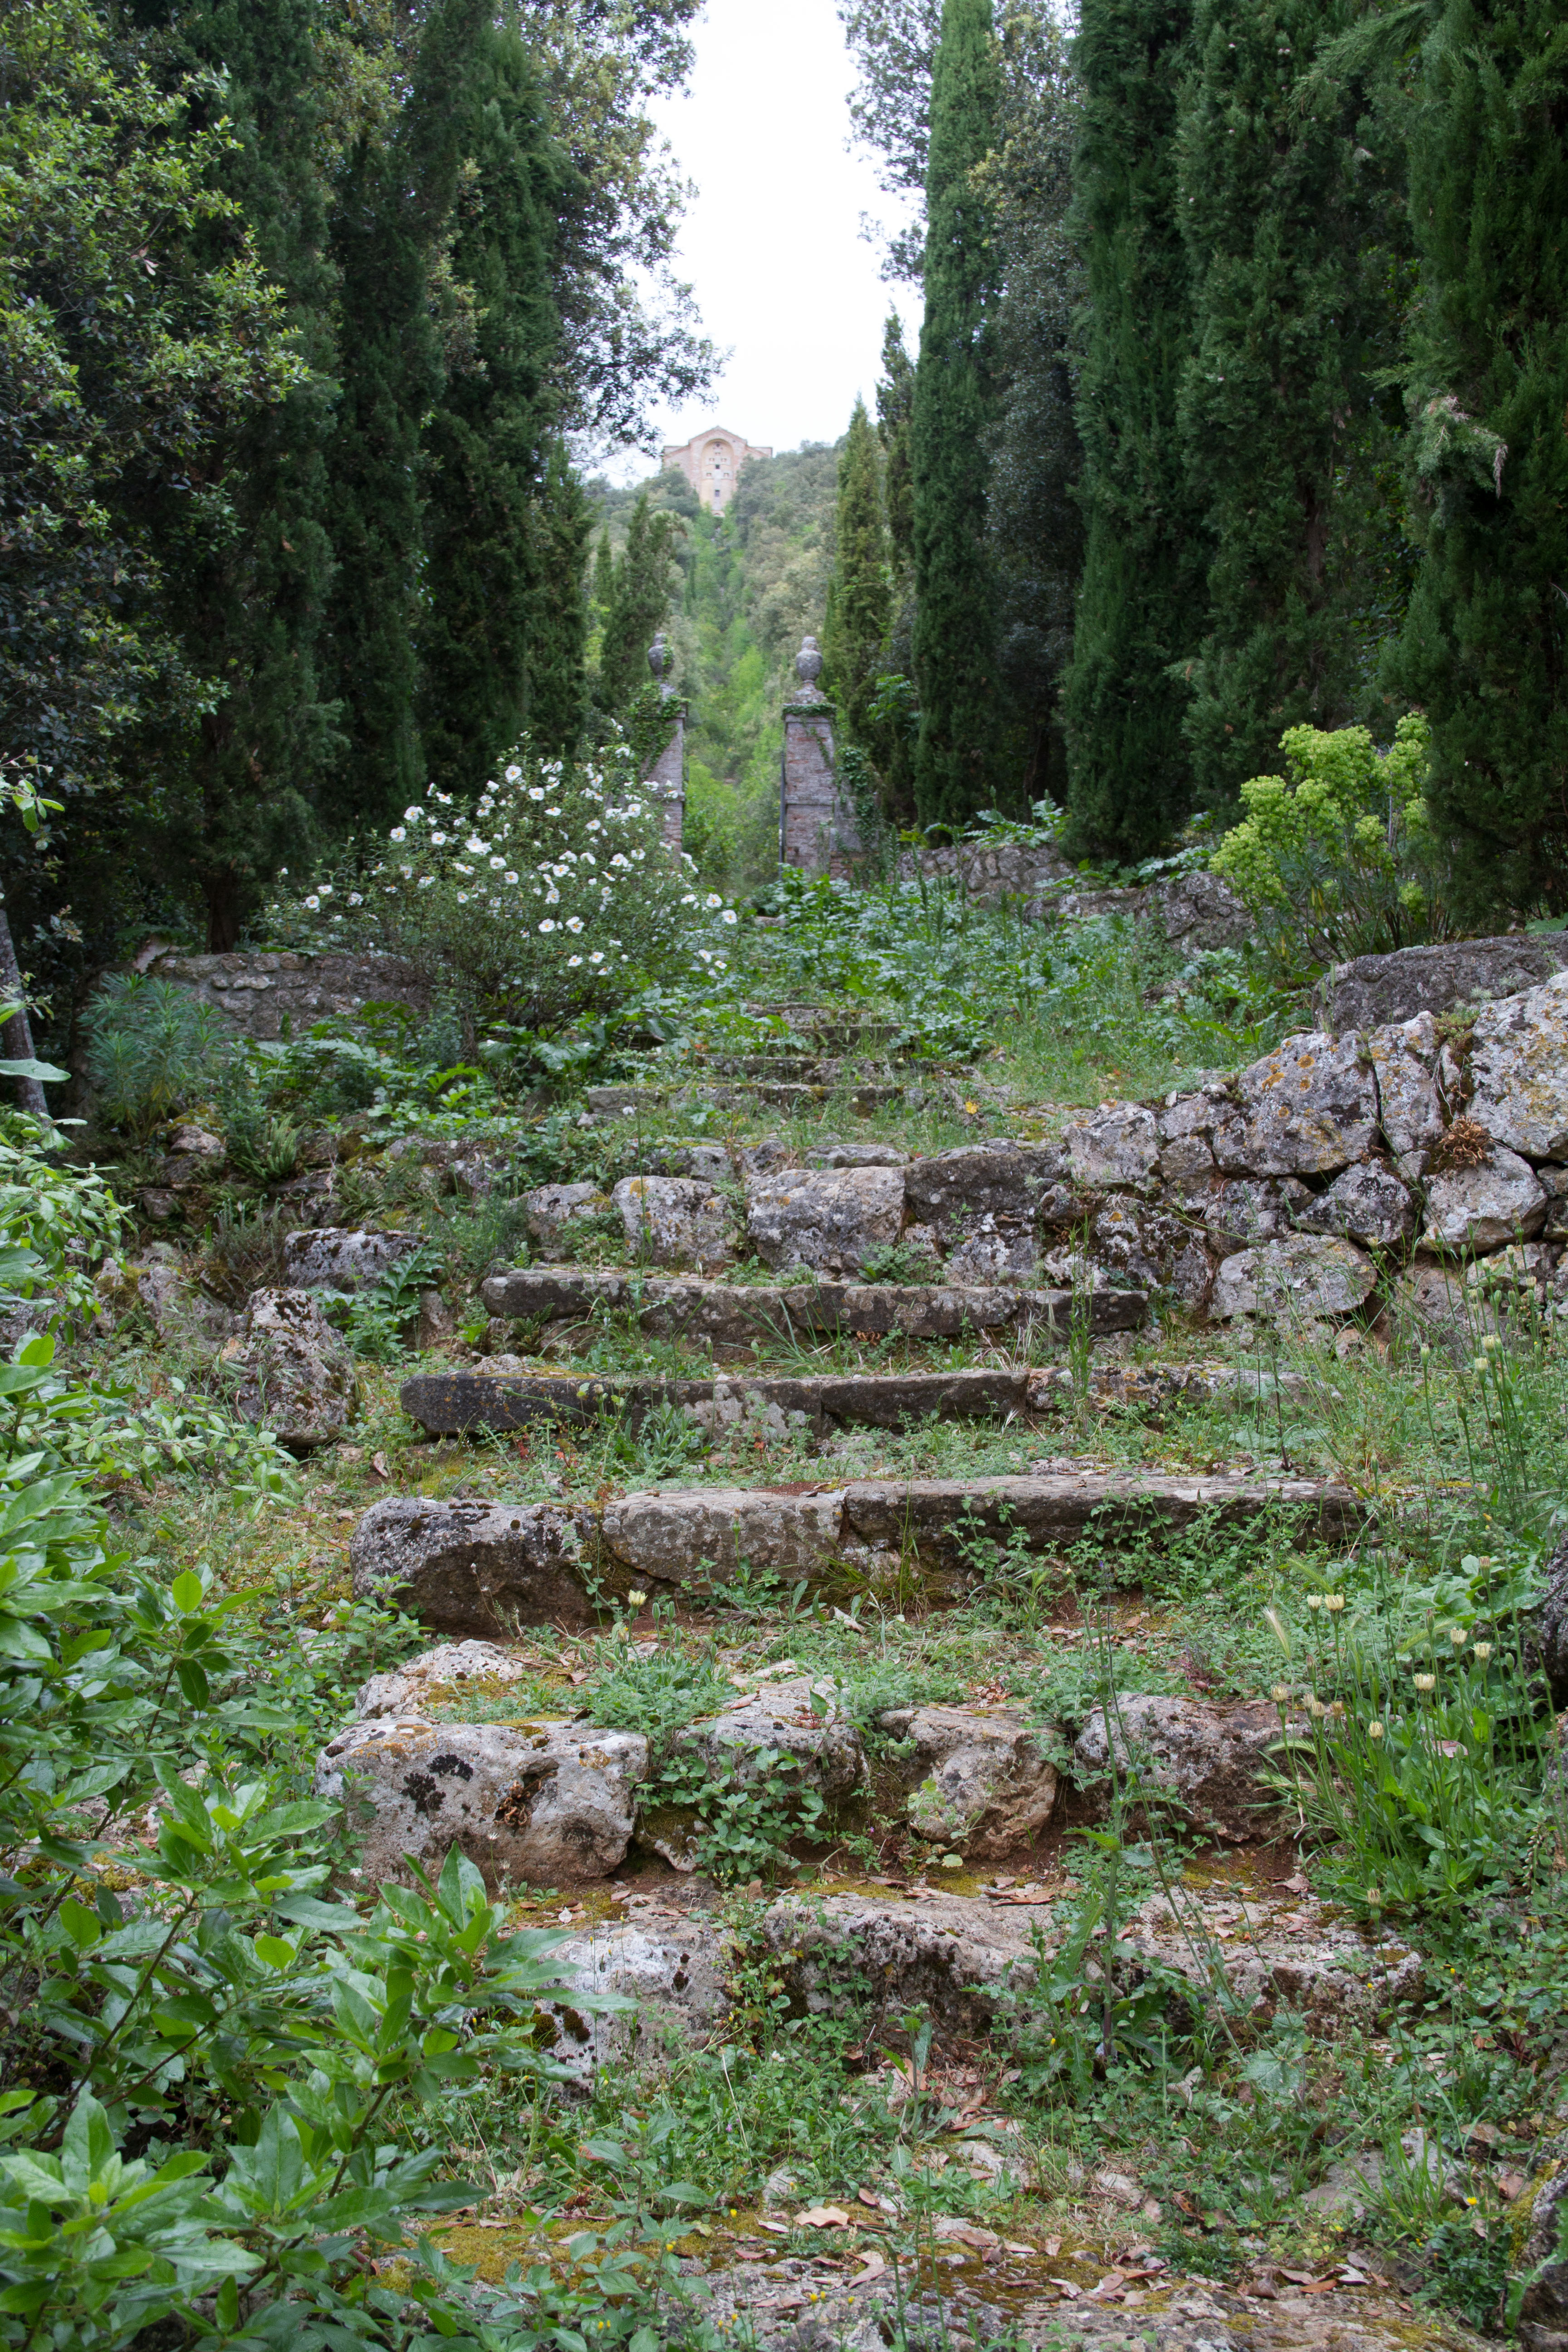 An uneven staircase leads up the hillside at Villa Cetinale.